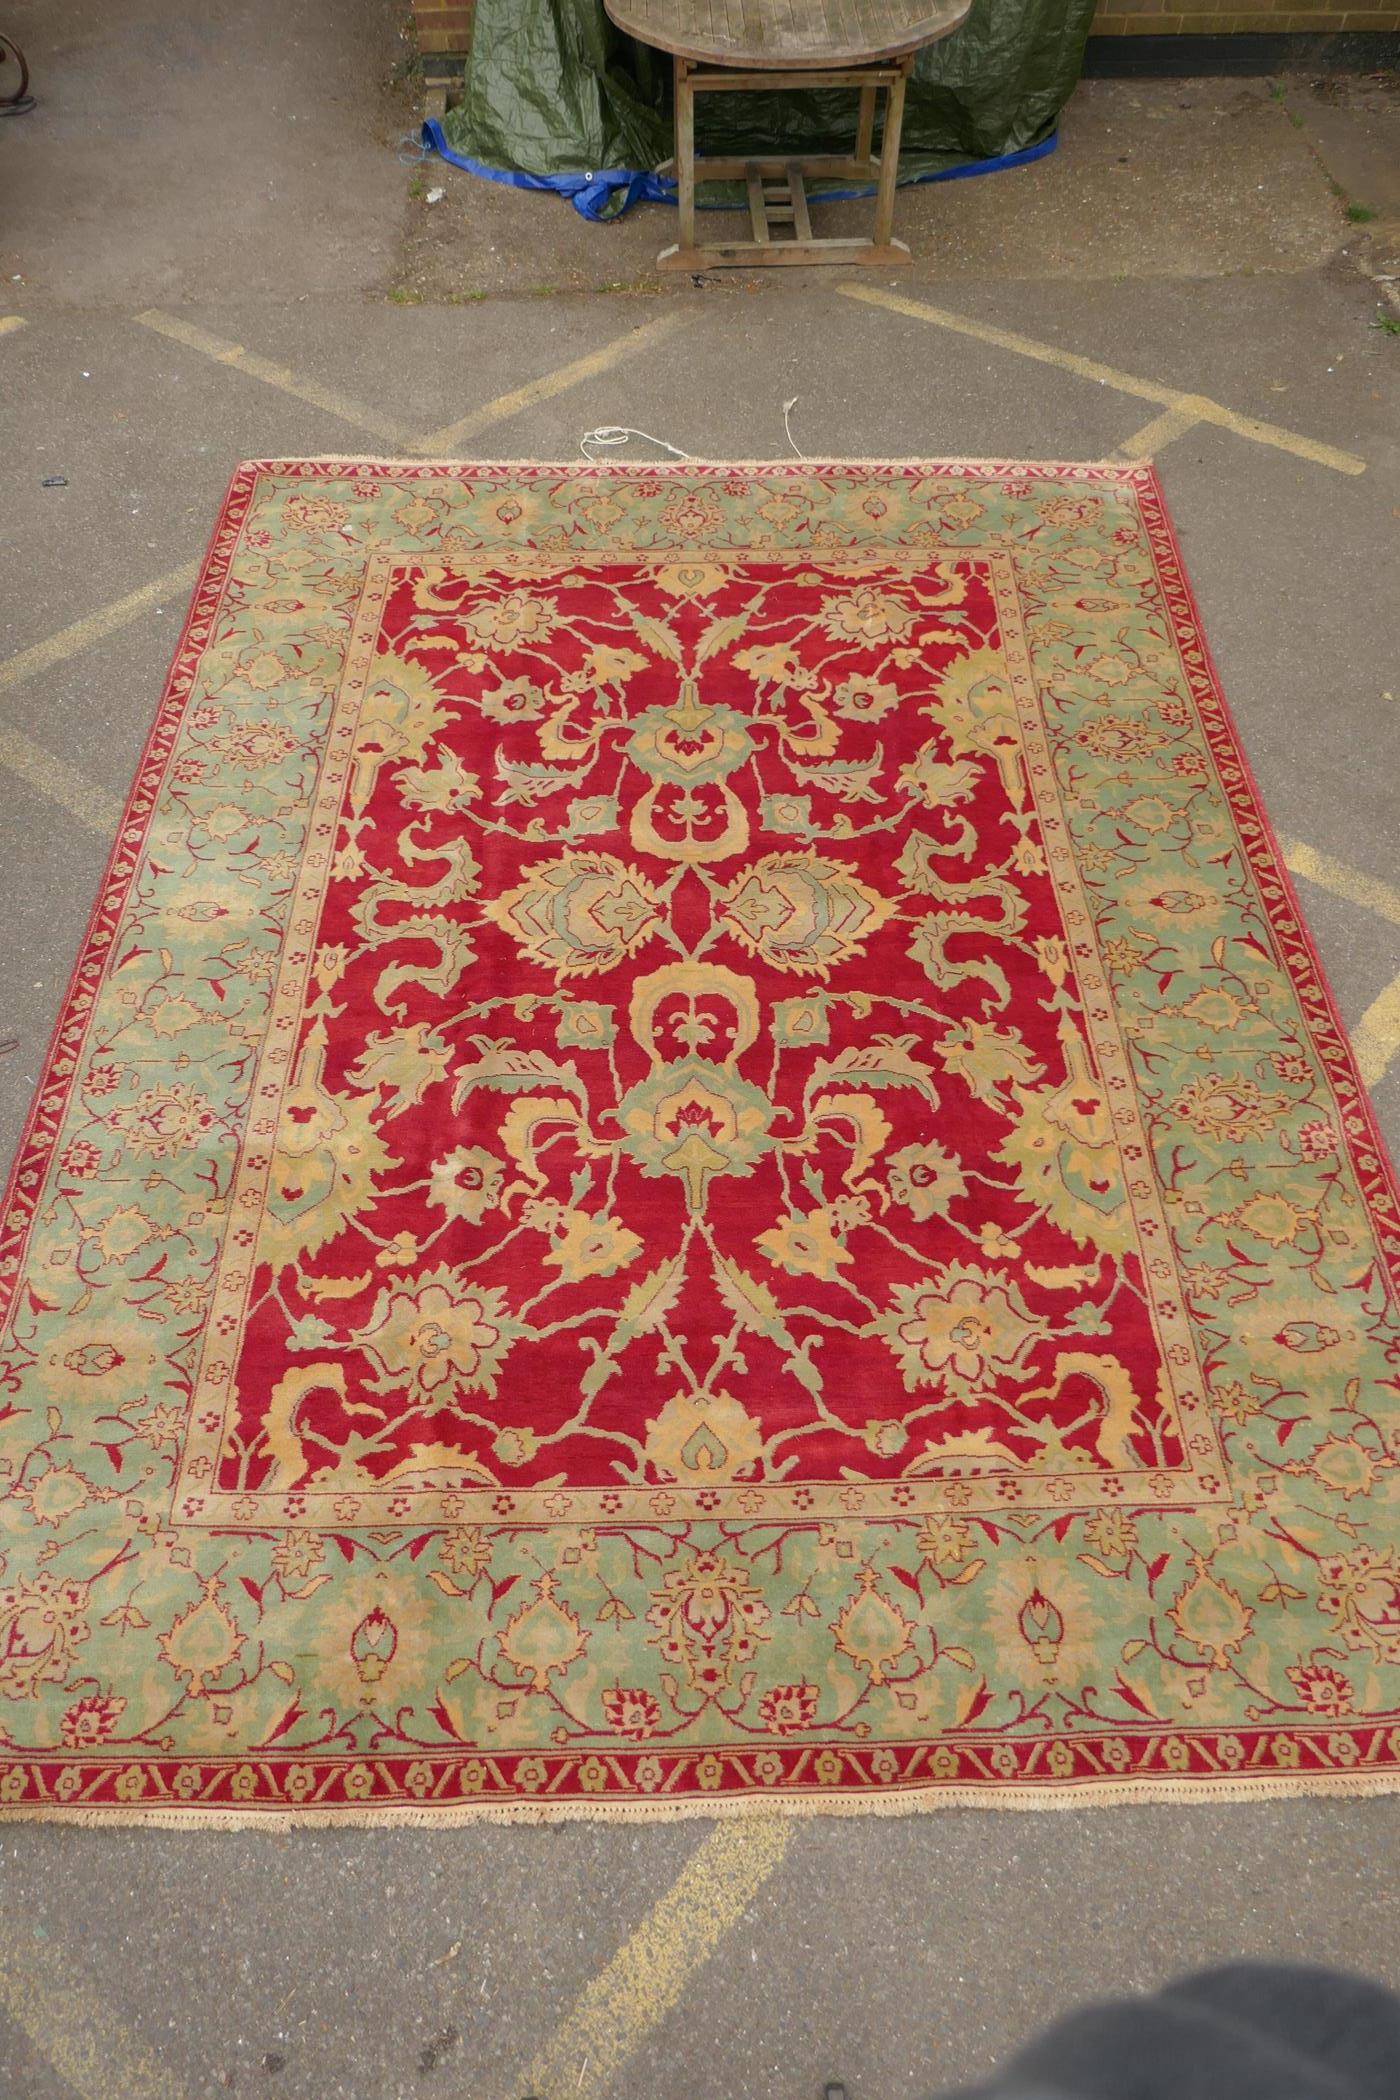 An antique red ground Agra carpet with floral design and olive green borders, AF wear, 108" x 140" - Image 2 of 8